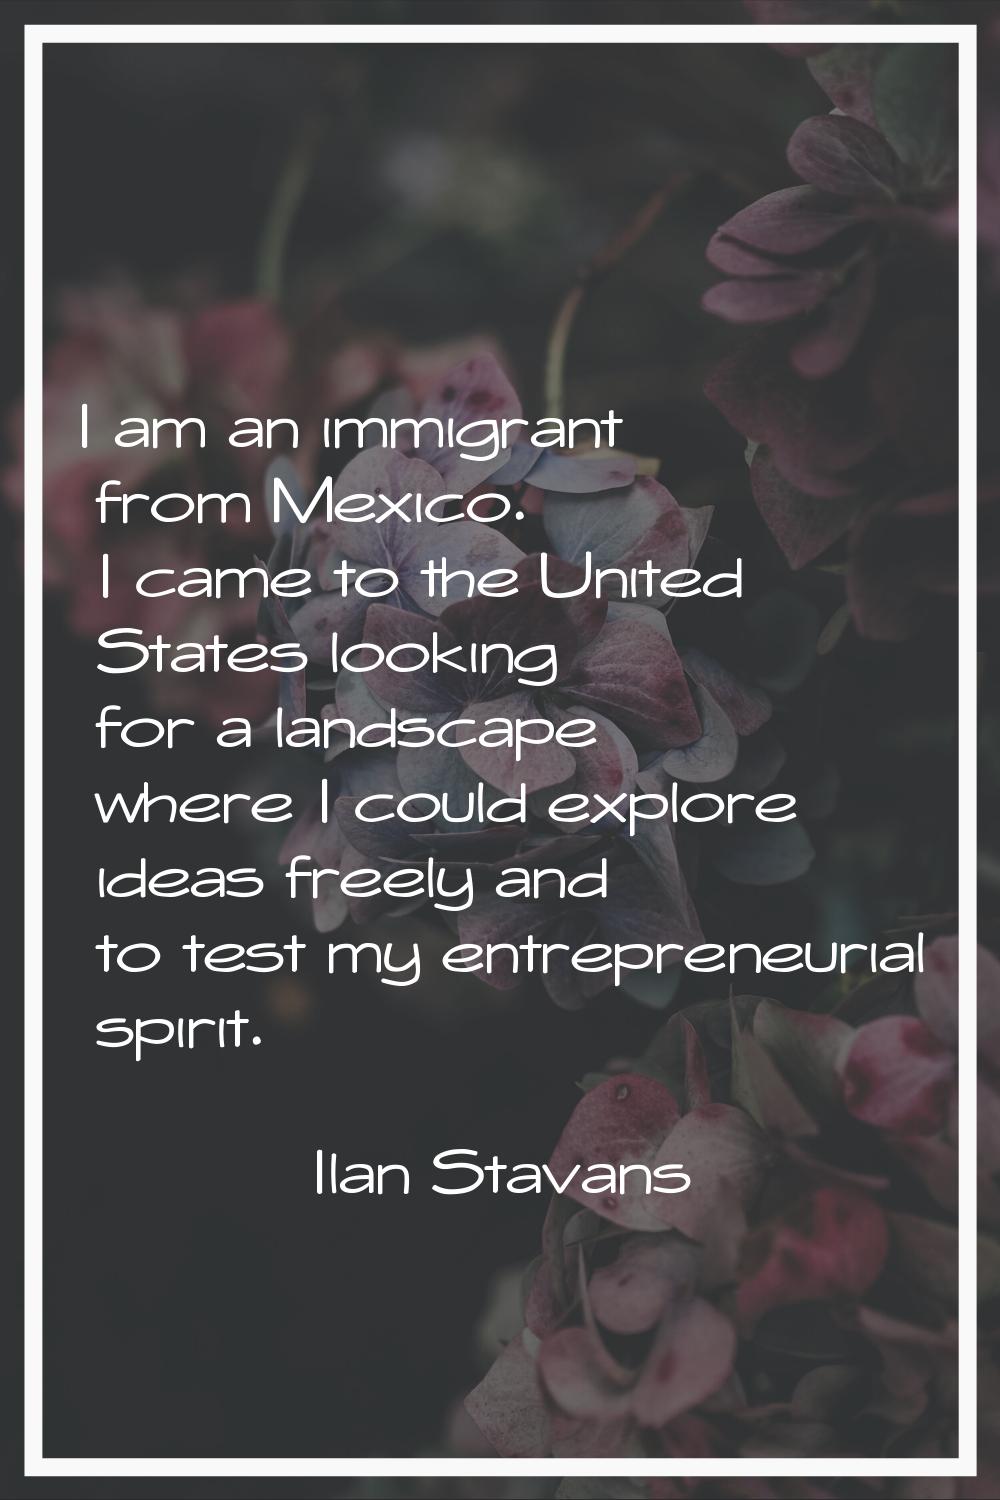 I am an immigrant from Mexico. I came to the United States looking for a landscape where I could ex